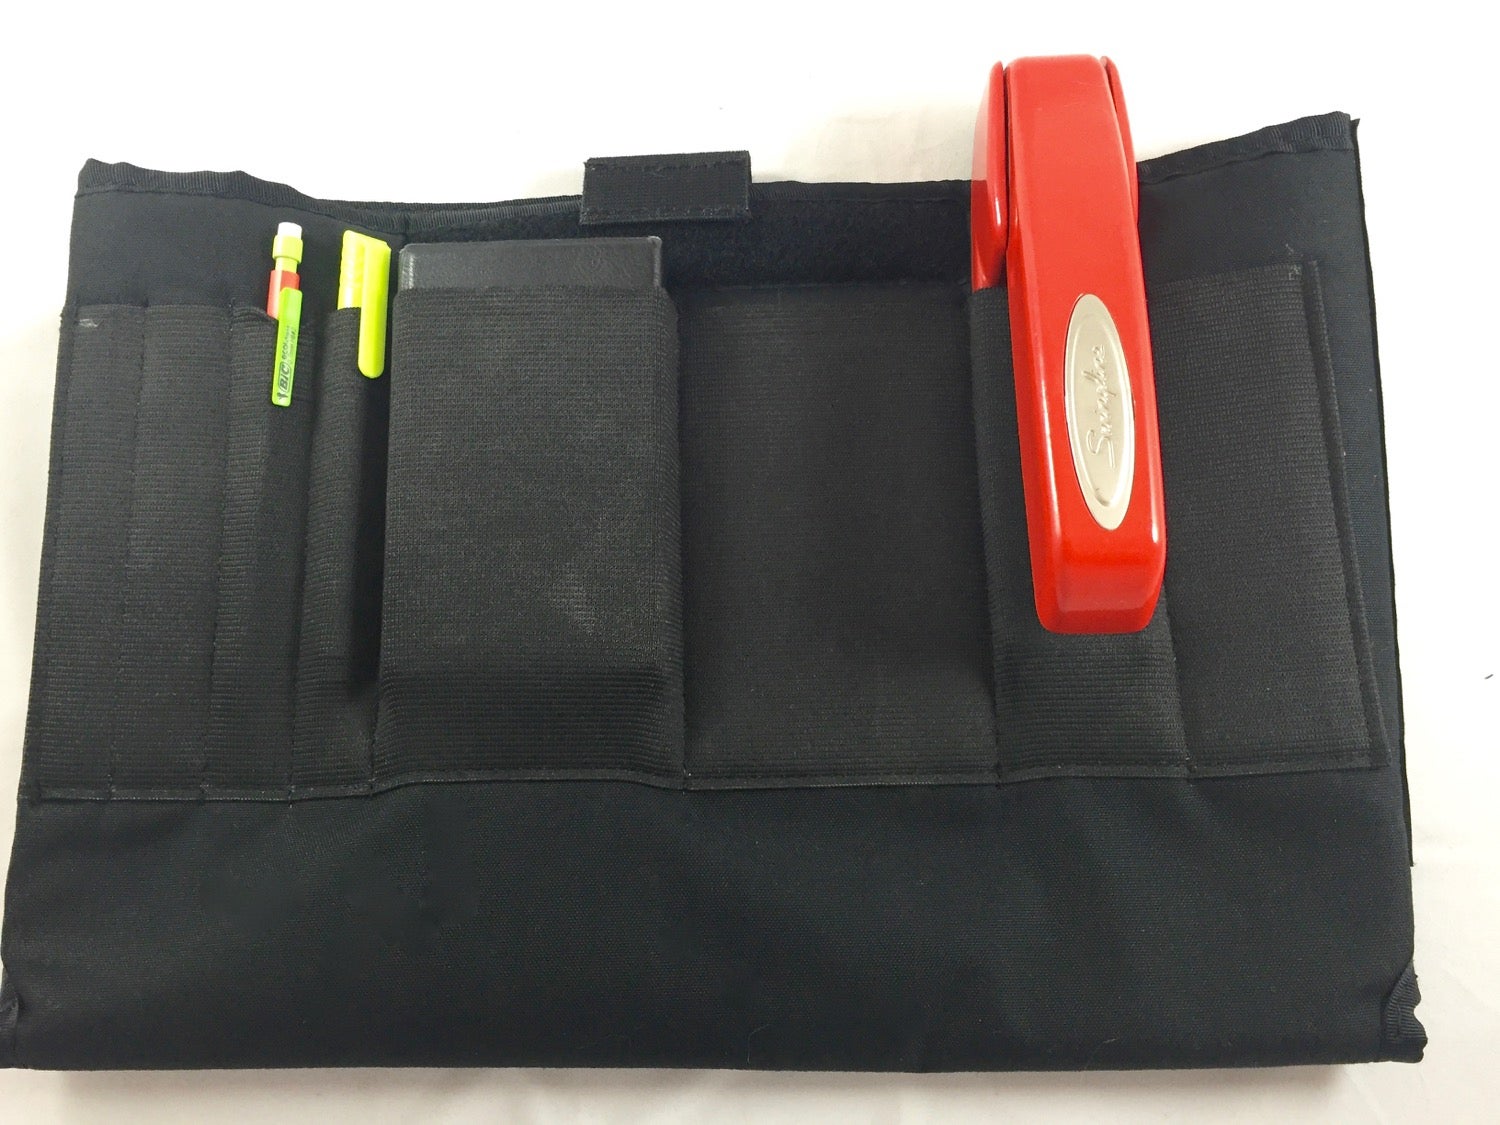 Elastic loops for holding pens, pencils, small rectangularish thingies, and Red Swingline Model 747 staplers.